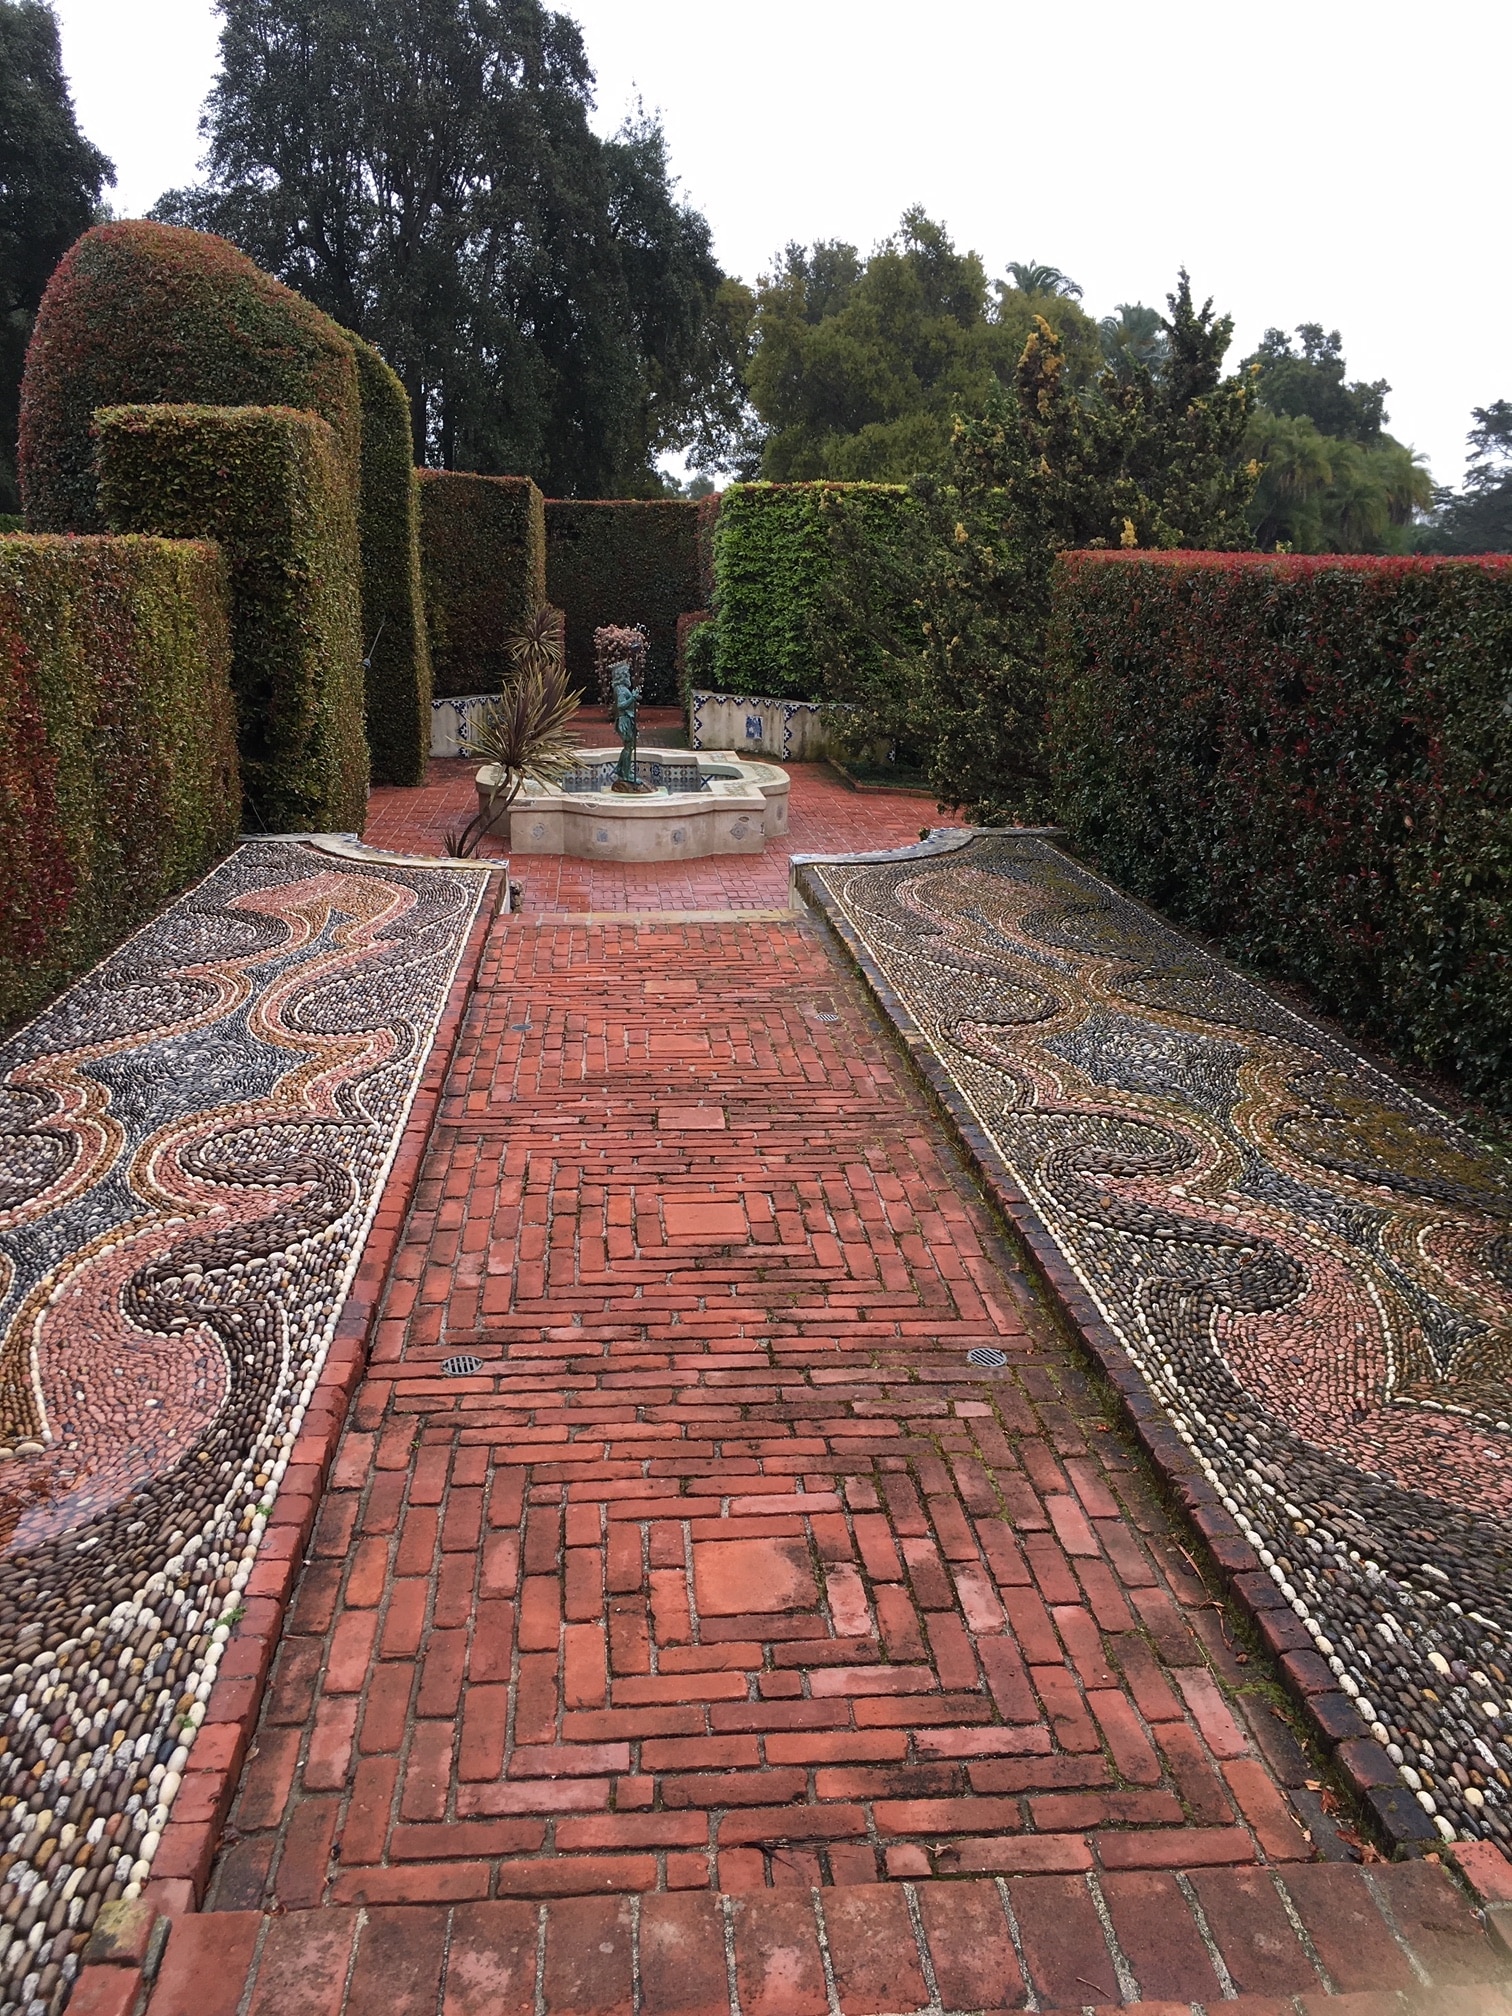 Brick mosaic path lined by formally manicured shrubs